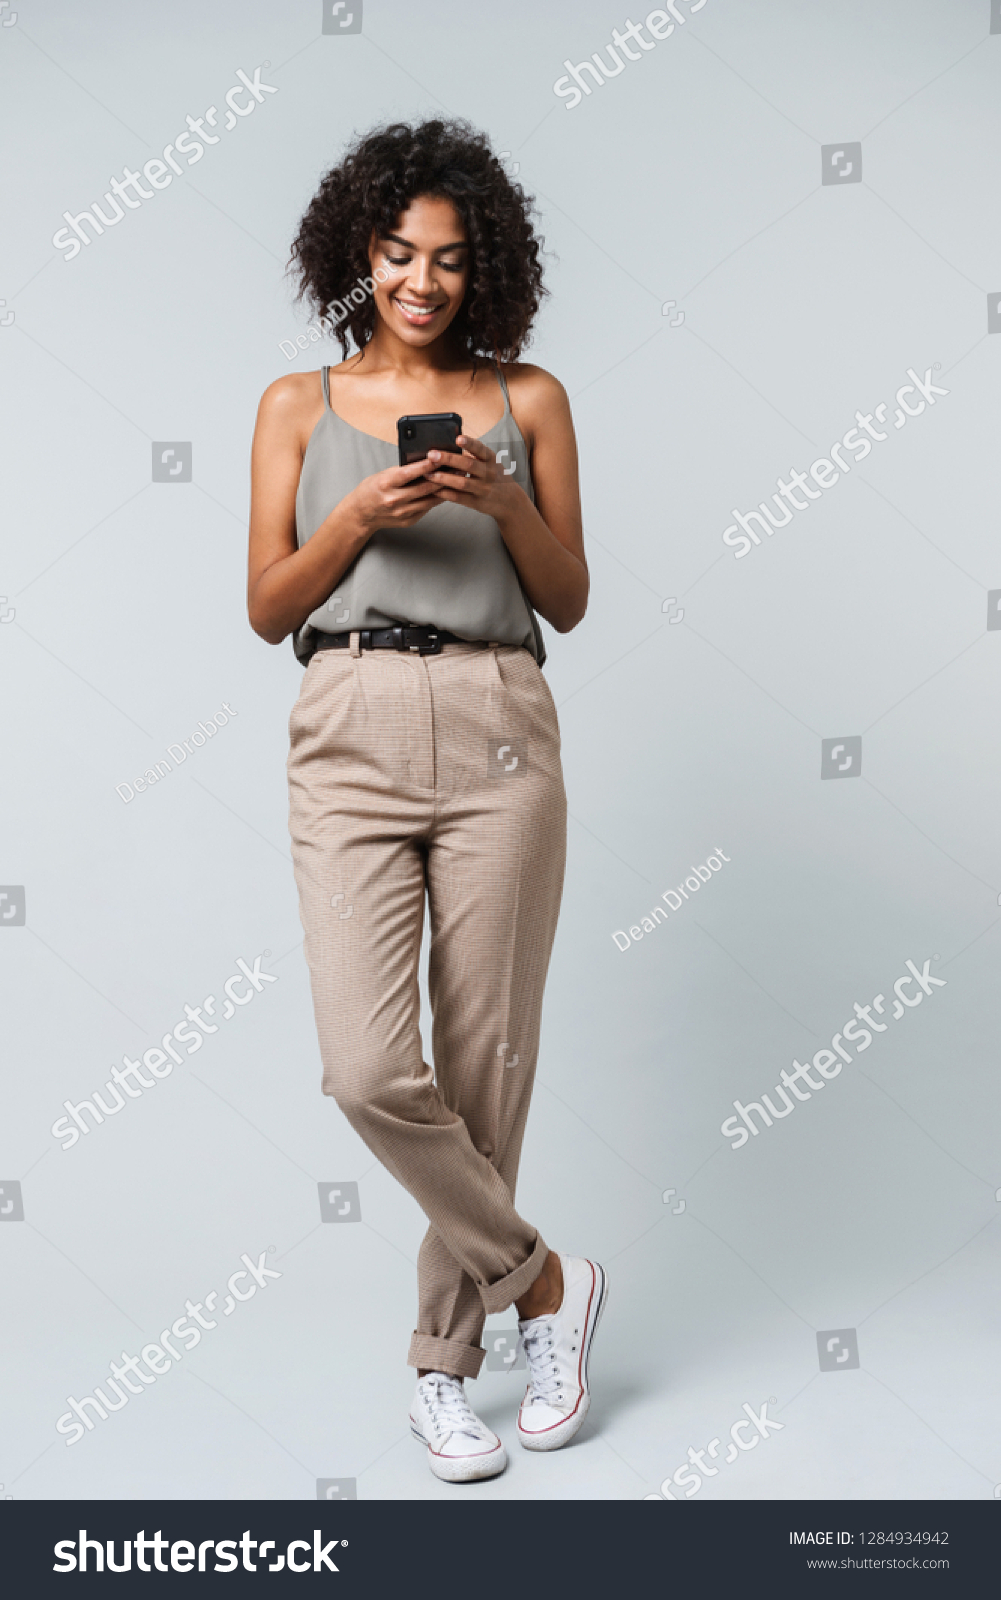 Full length of a happy young african woman casually dressed standing isolated over gray background, holding mobile phone #1284934942